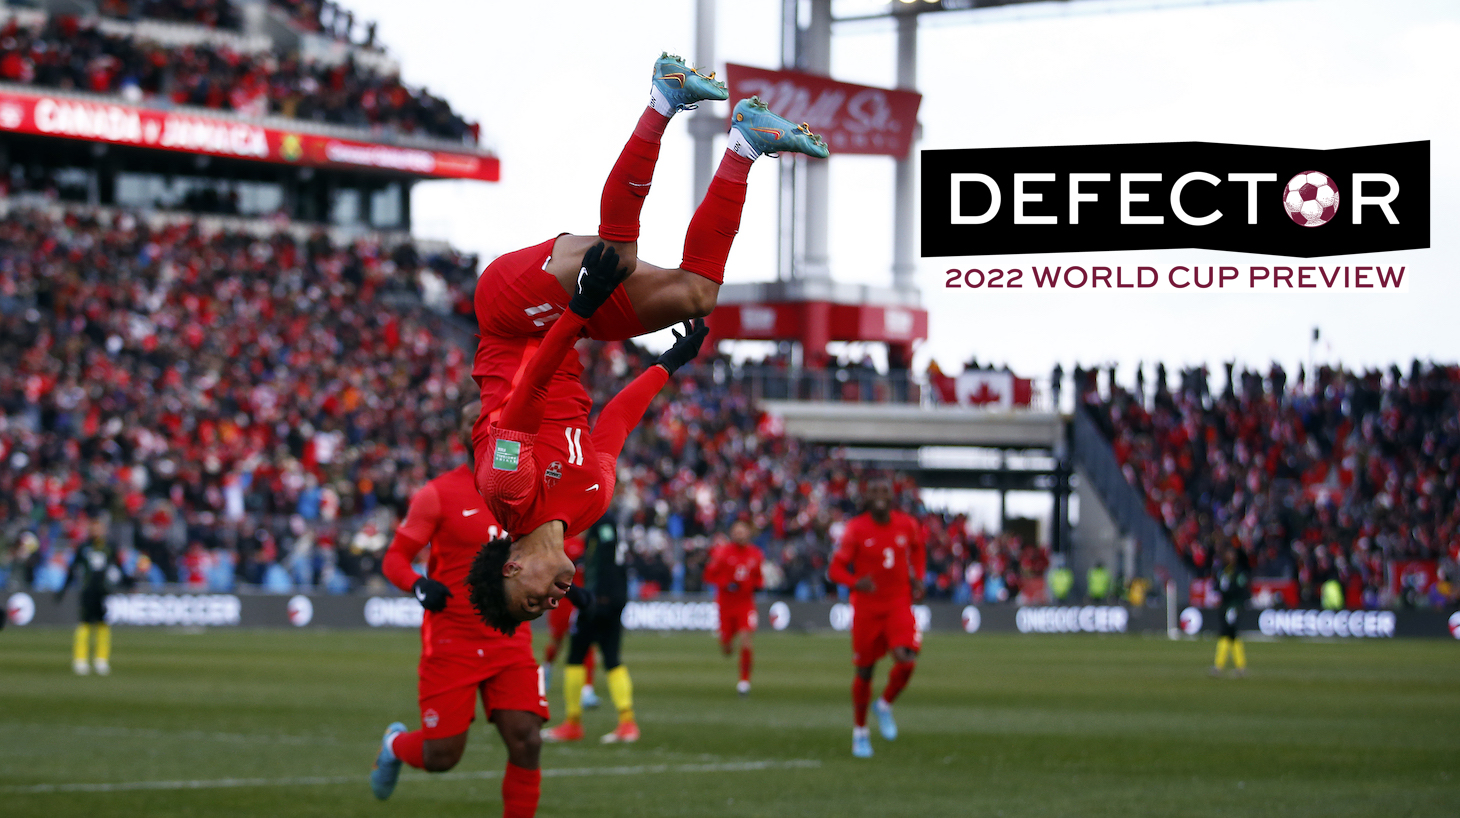 Tajon Buchanan #11 of Canada celebrates a goal during a 2022 World Cup Qualifying match against Jamaica at BMO Field on March 27, 2022 in Toronto, Ontario, Canada.